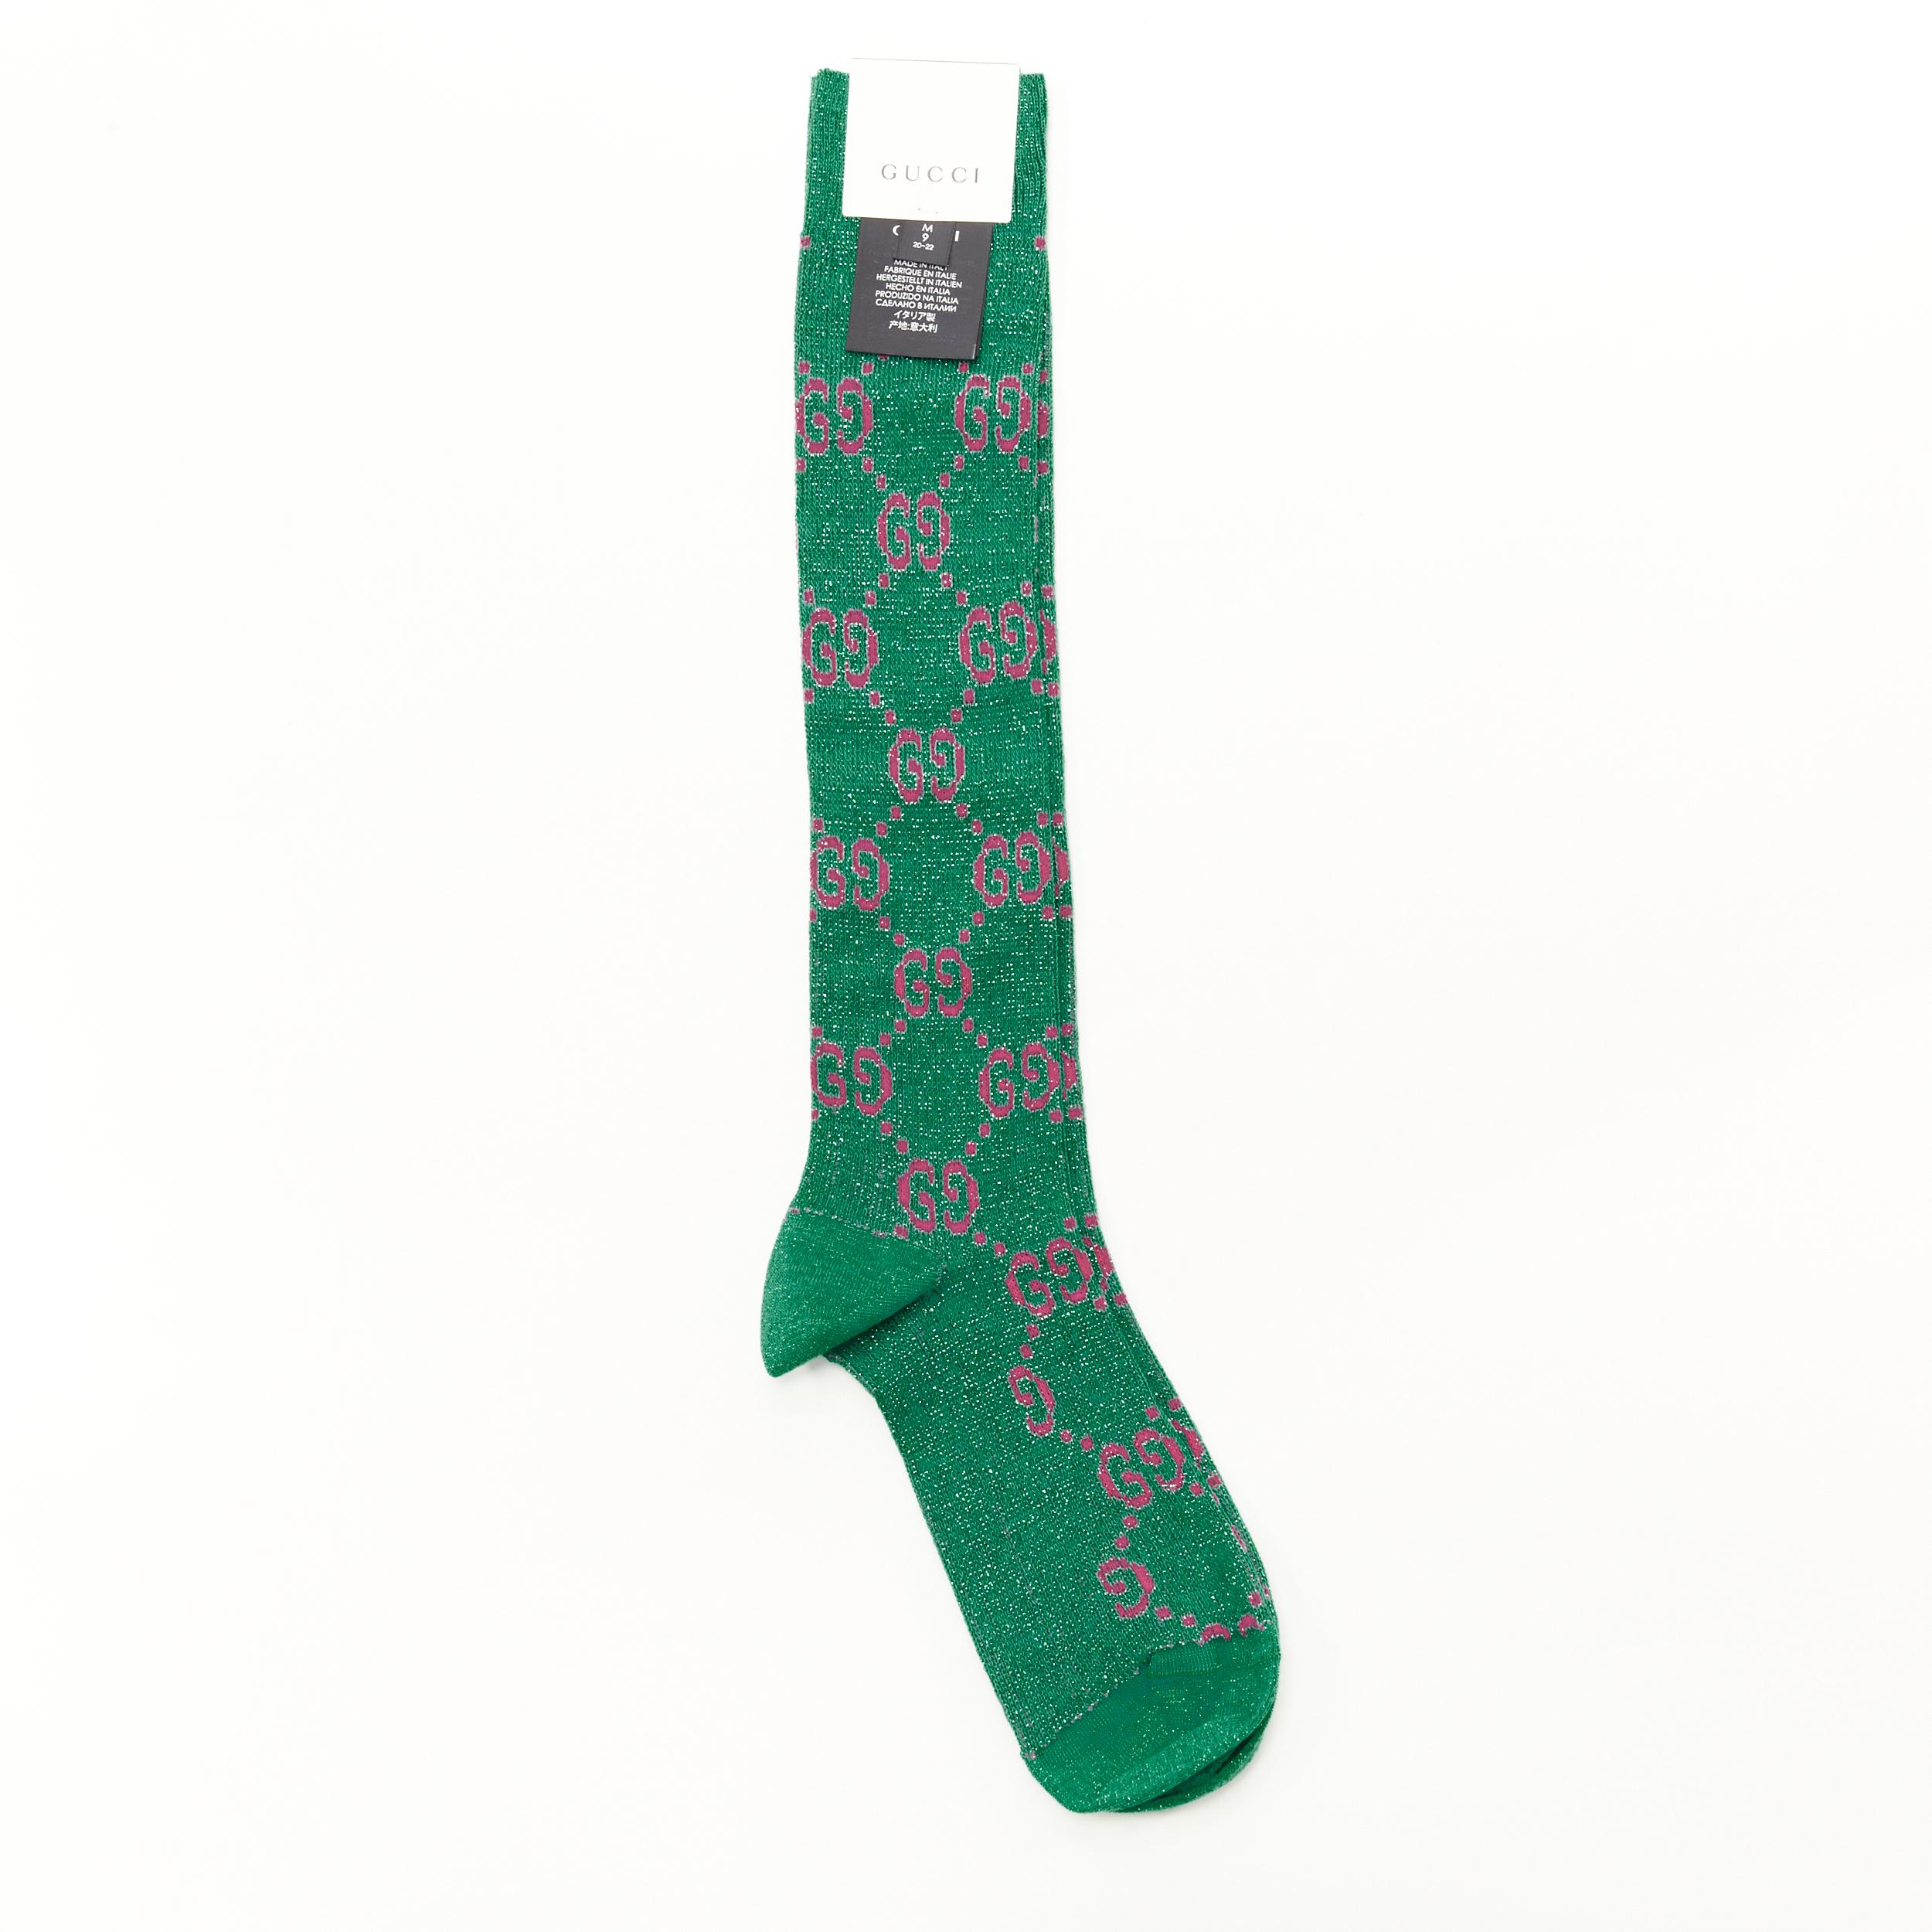 new GUCCI green pink lurex metallic GG monogram long socks M Reference: ANWU/A00224 Brand: Gucci Designer: Alessandro Michele Material: Cotton Color: Green Pattern: Logo Extra Detail: Metallic speckle lurex. Made in: Italy CONDITION: Condition: New